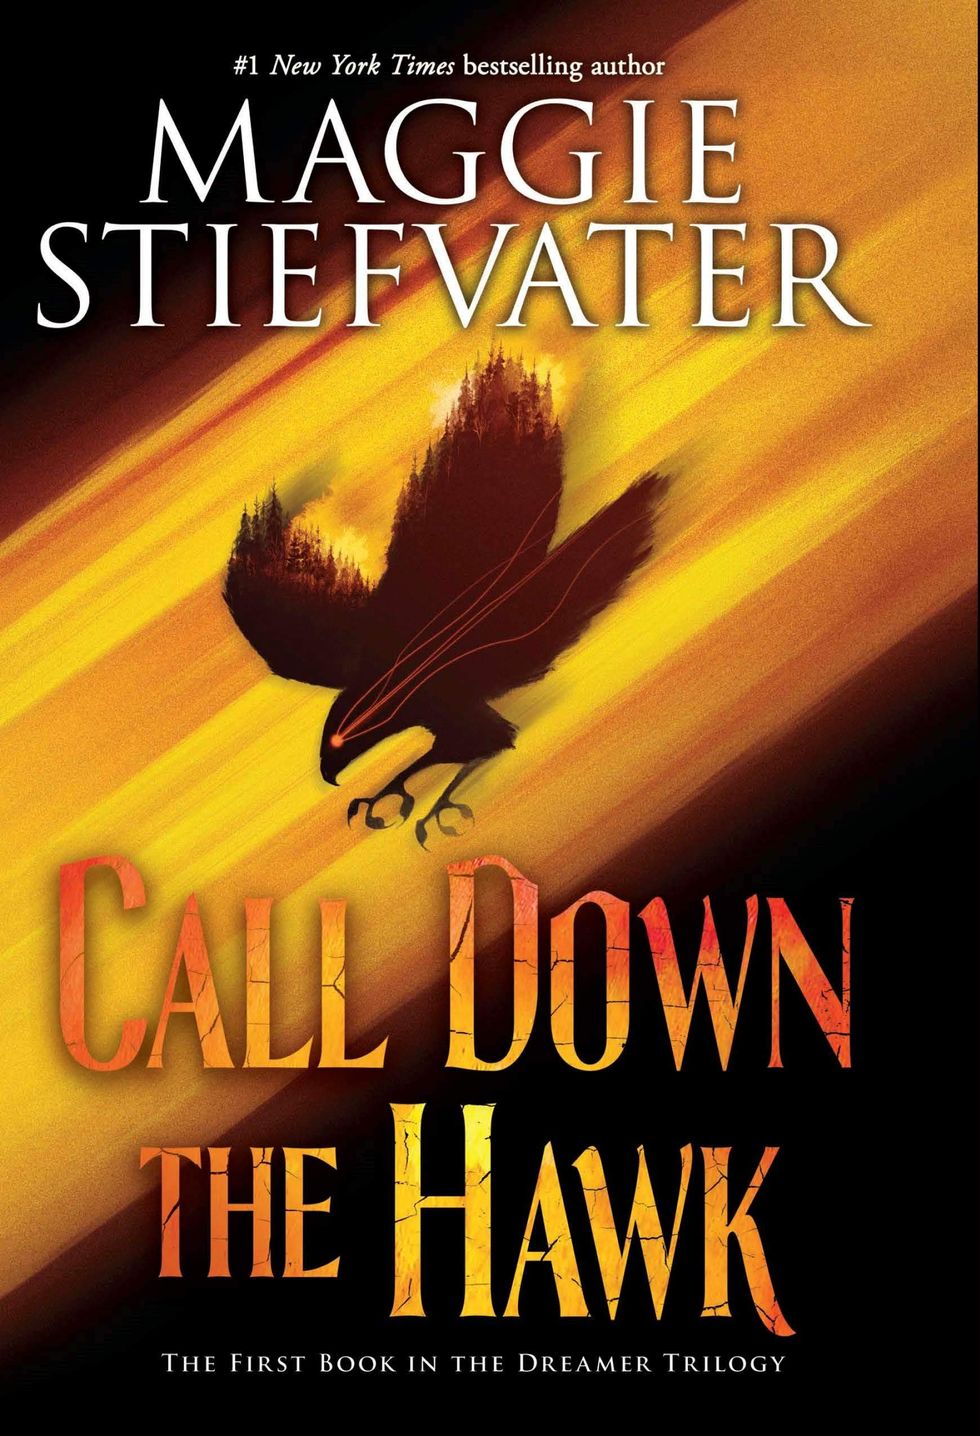 "Call Down the Hawk" by Maggie Stiefvater - Best YA Books of 2019